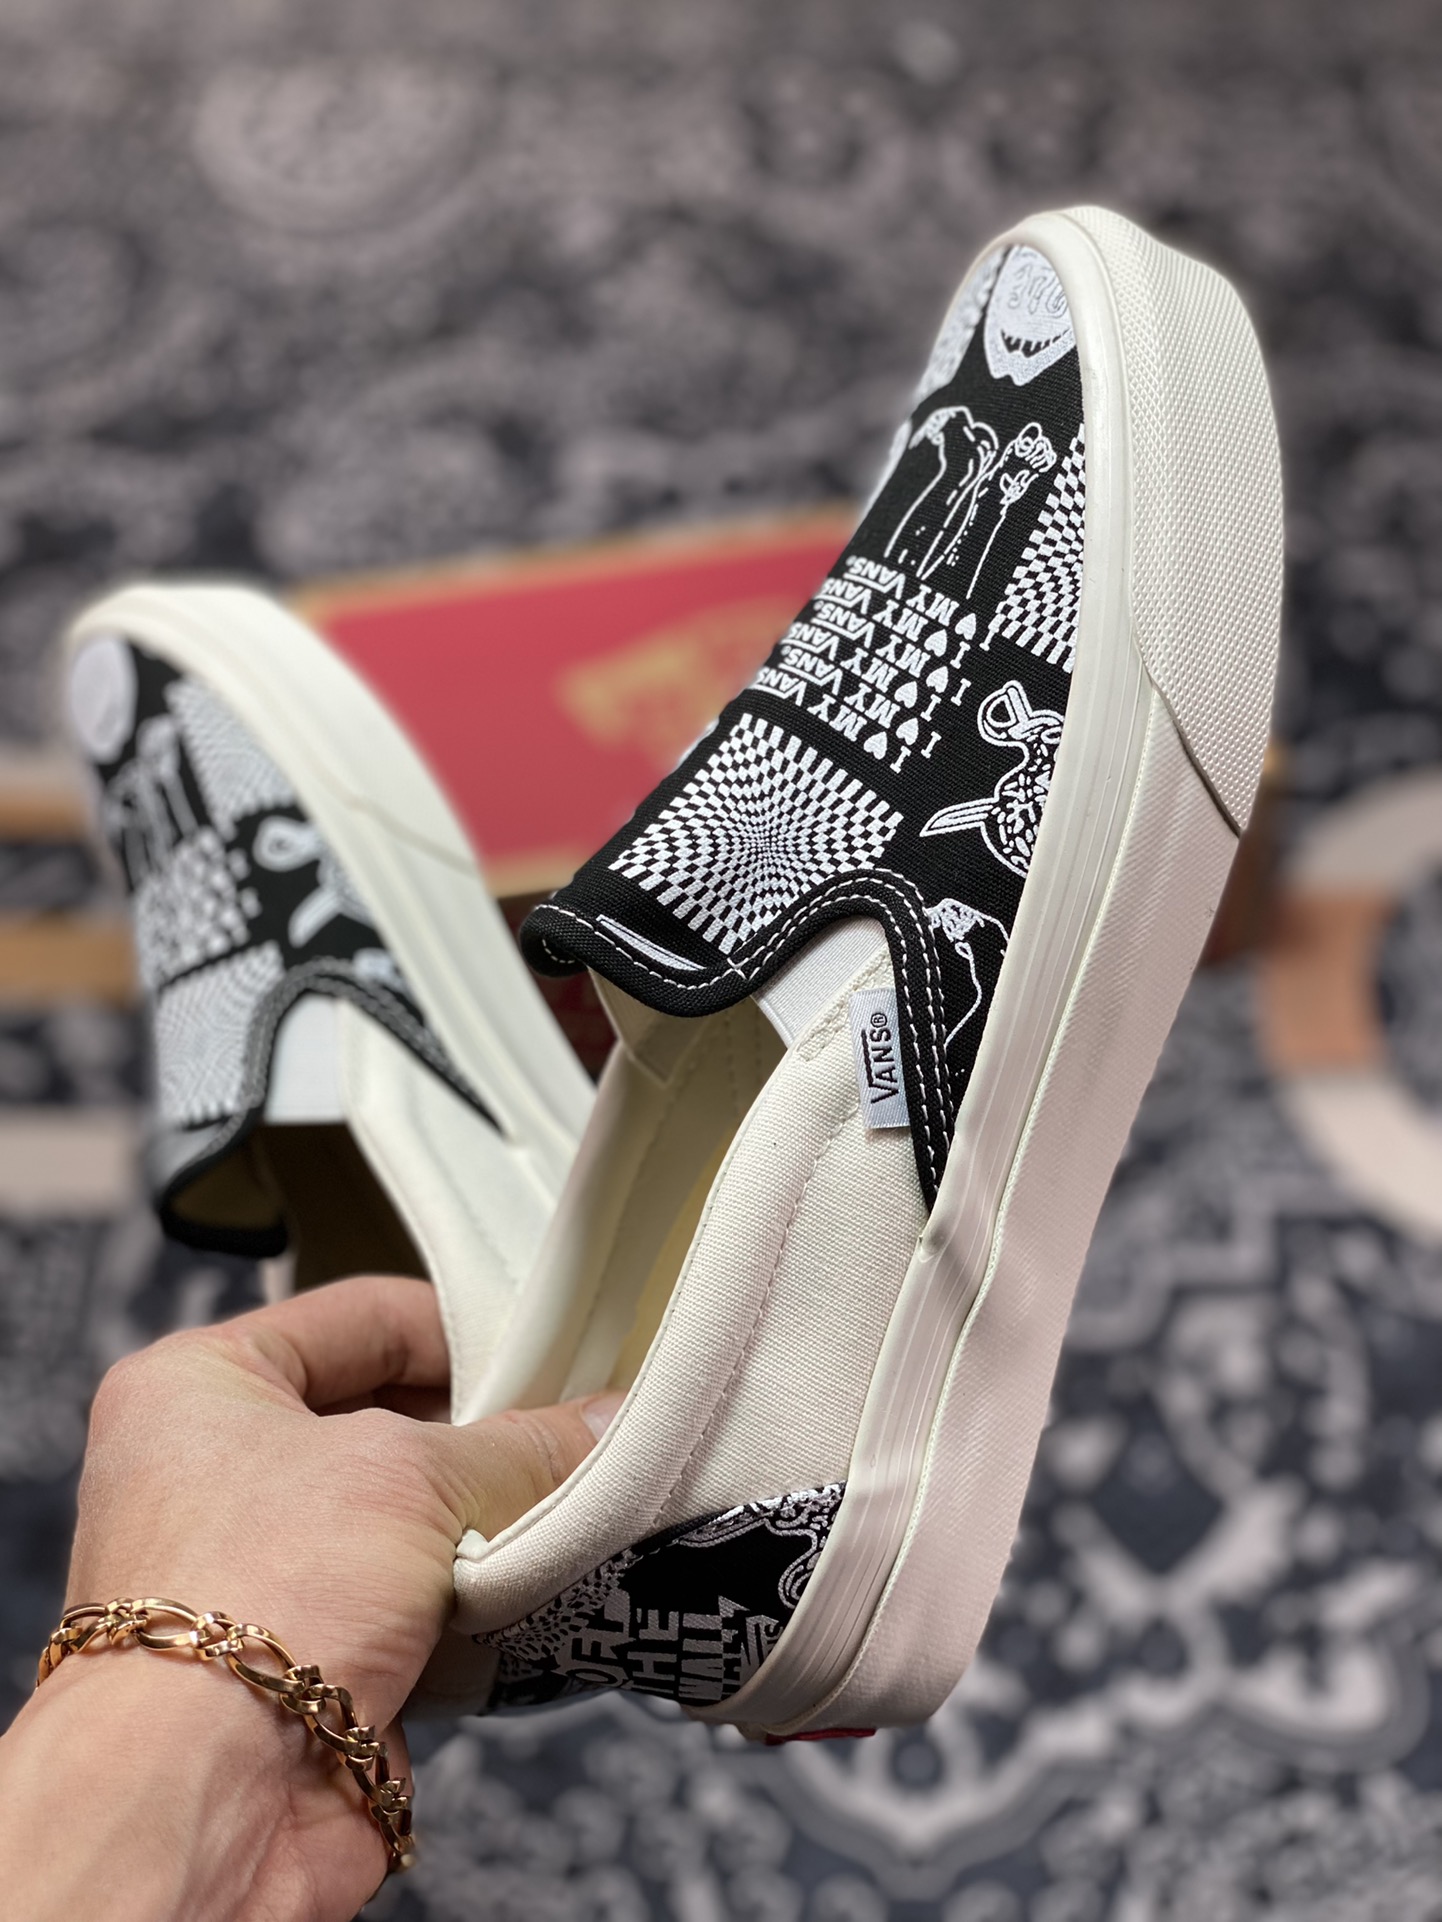 Vans Anaheim Factory Slip-On official black and white graffiti canvas shoes